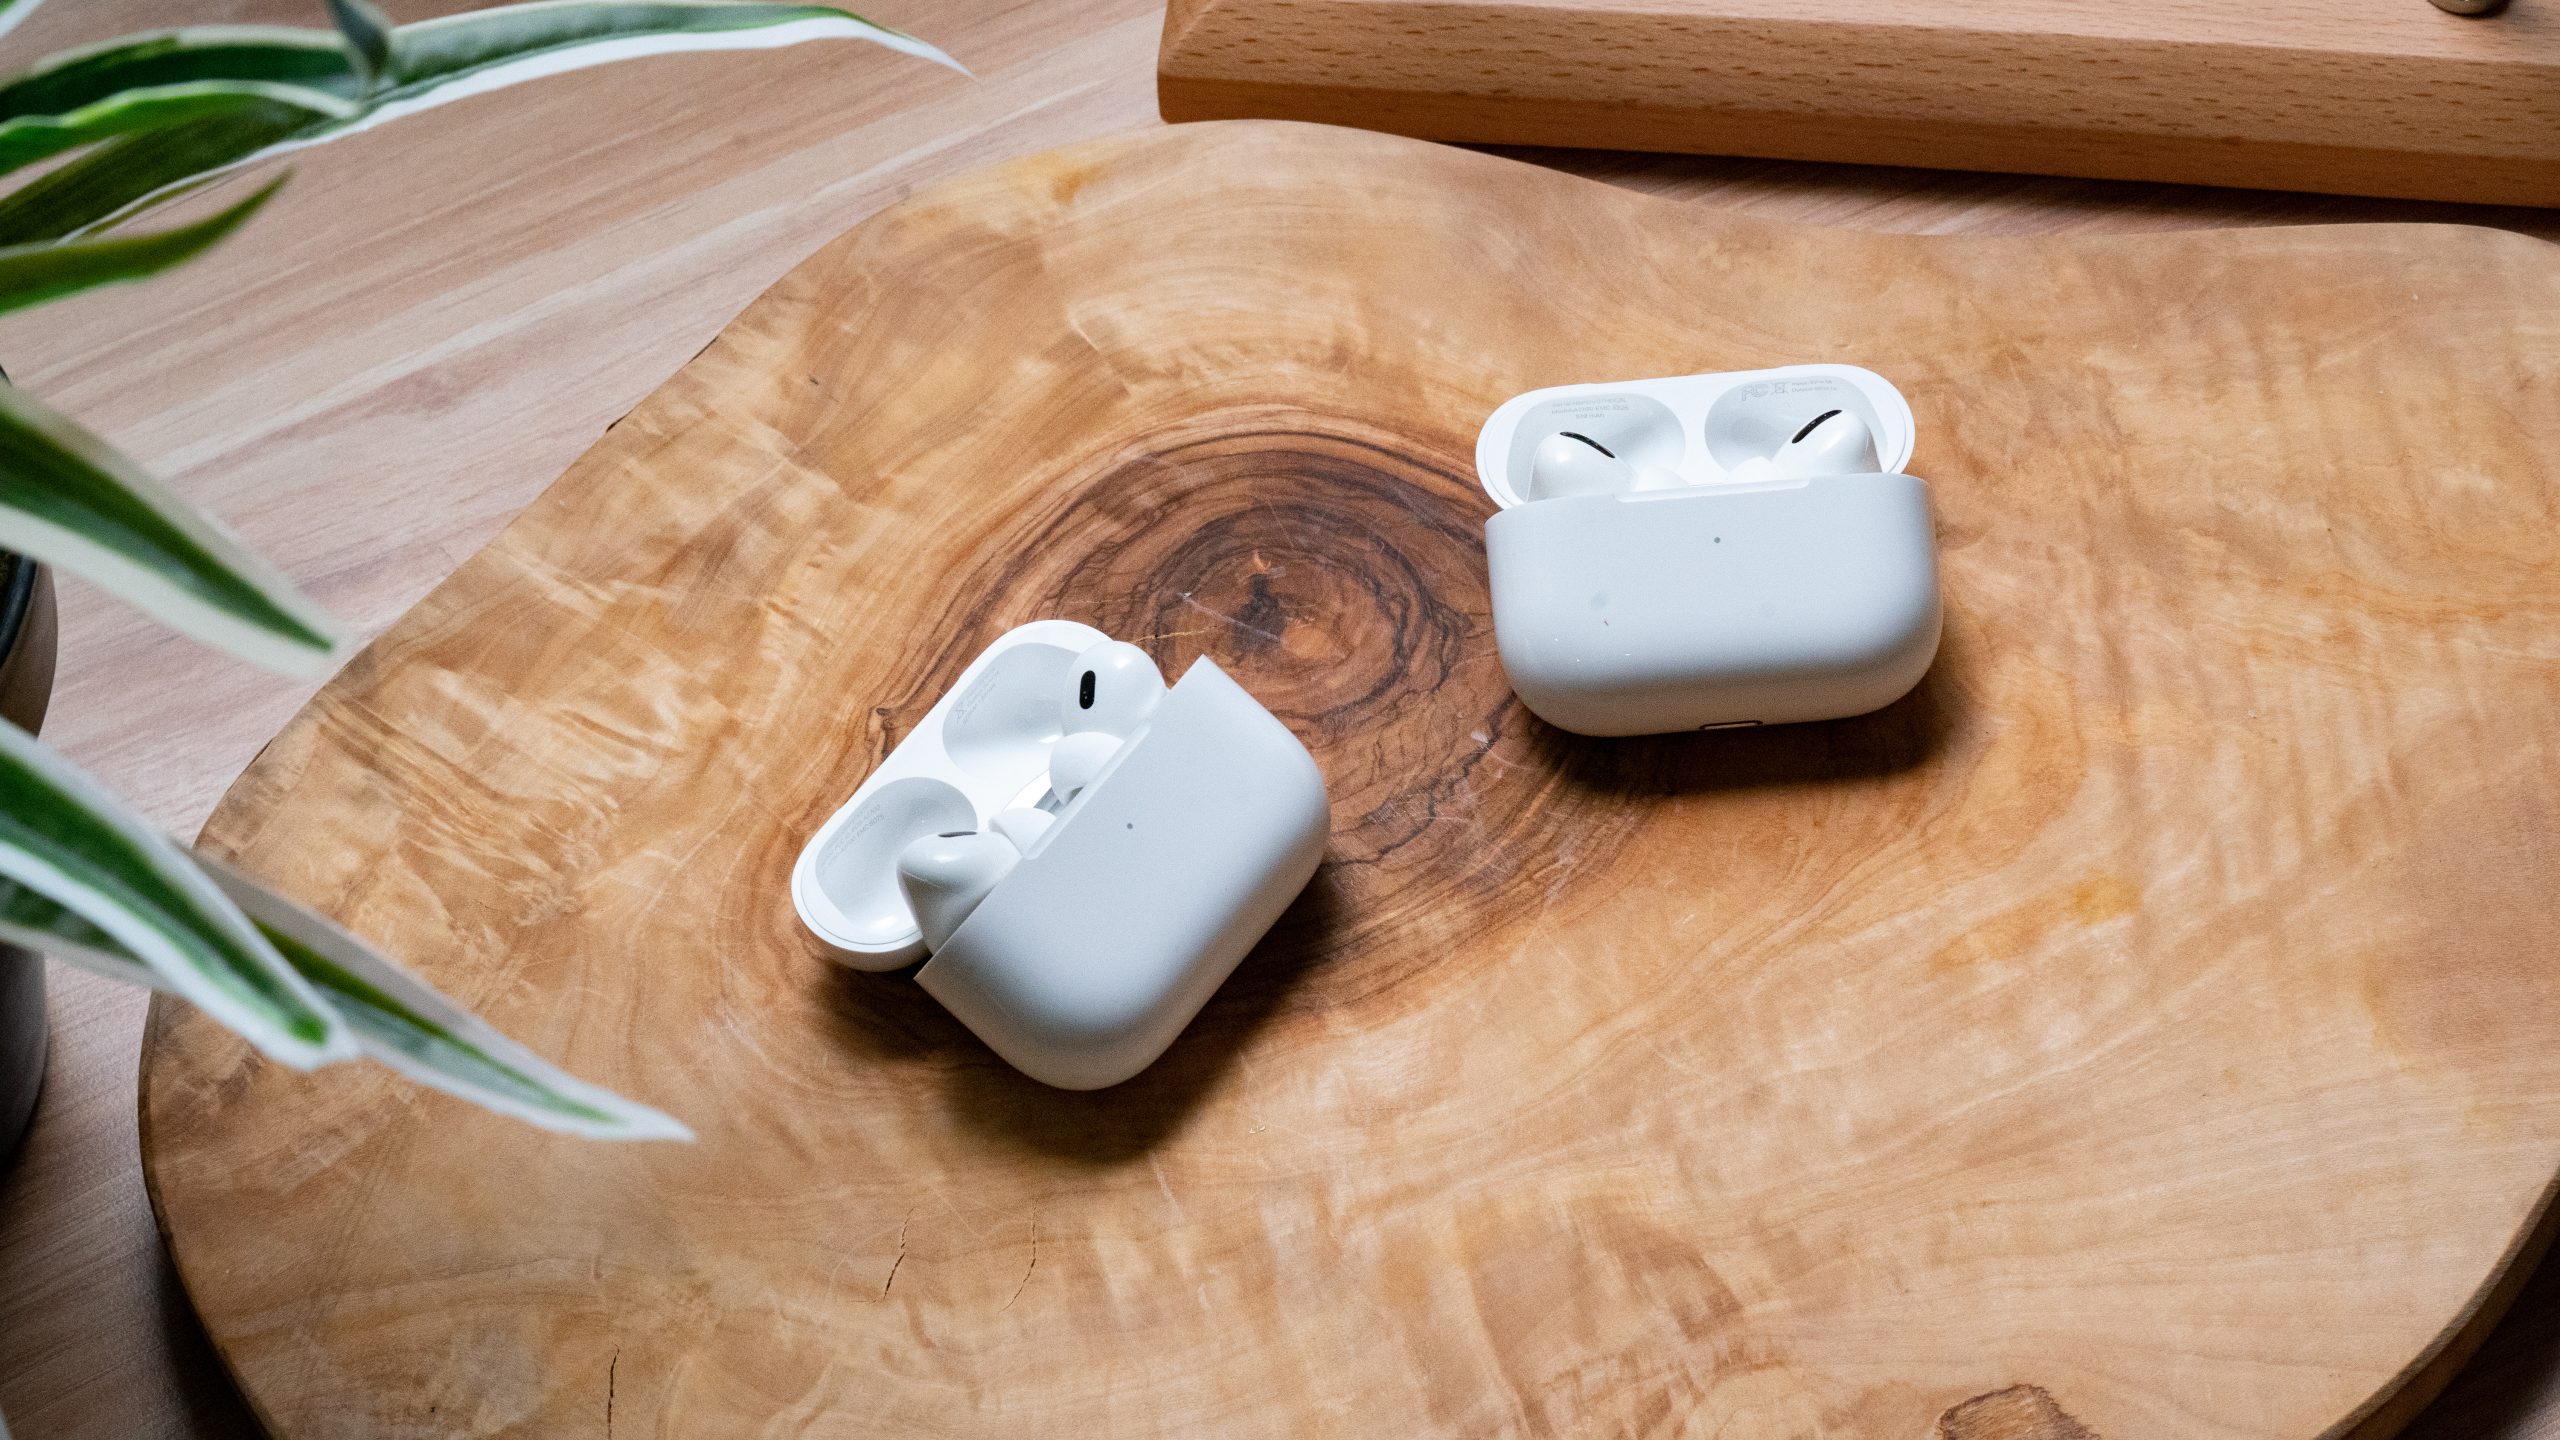 The Apple AirPods Pro (2nd generation) lays on a wooden surface next to the Apple AirPods Pro (1st generation), earbuds in open cases.